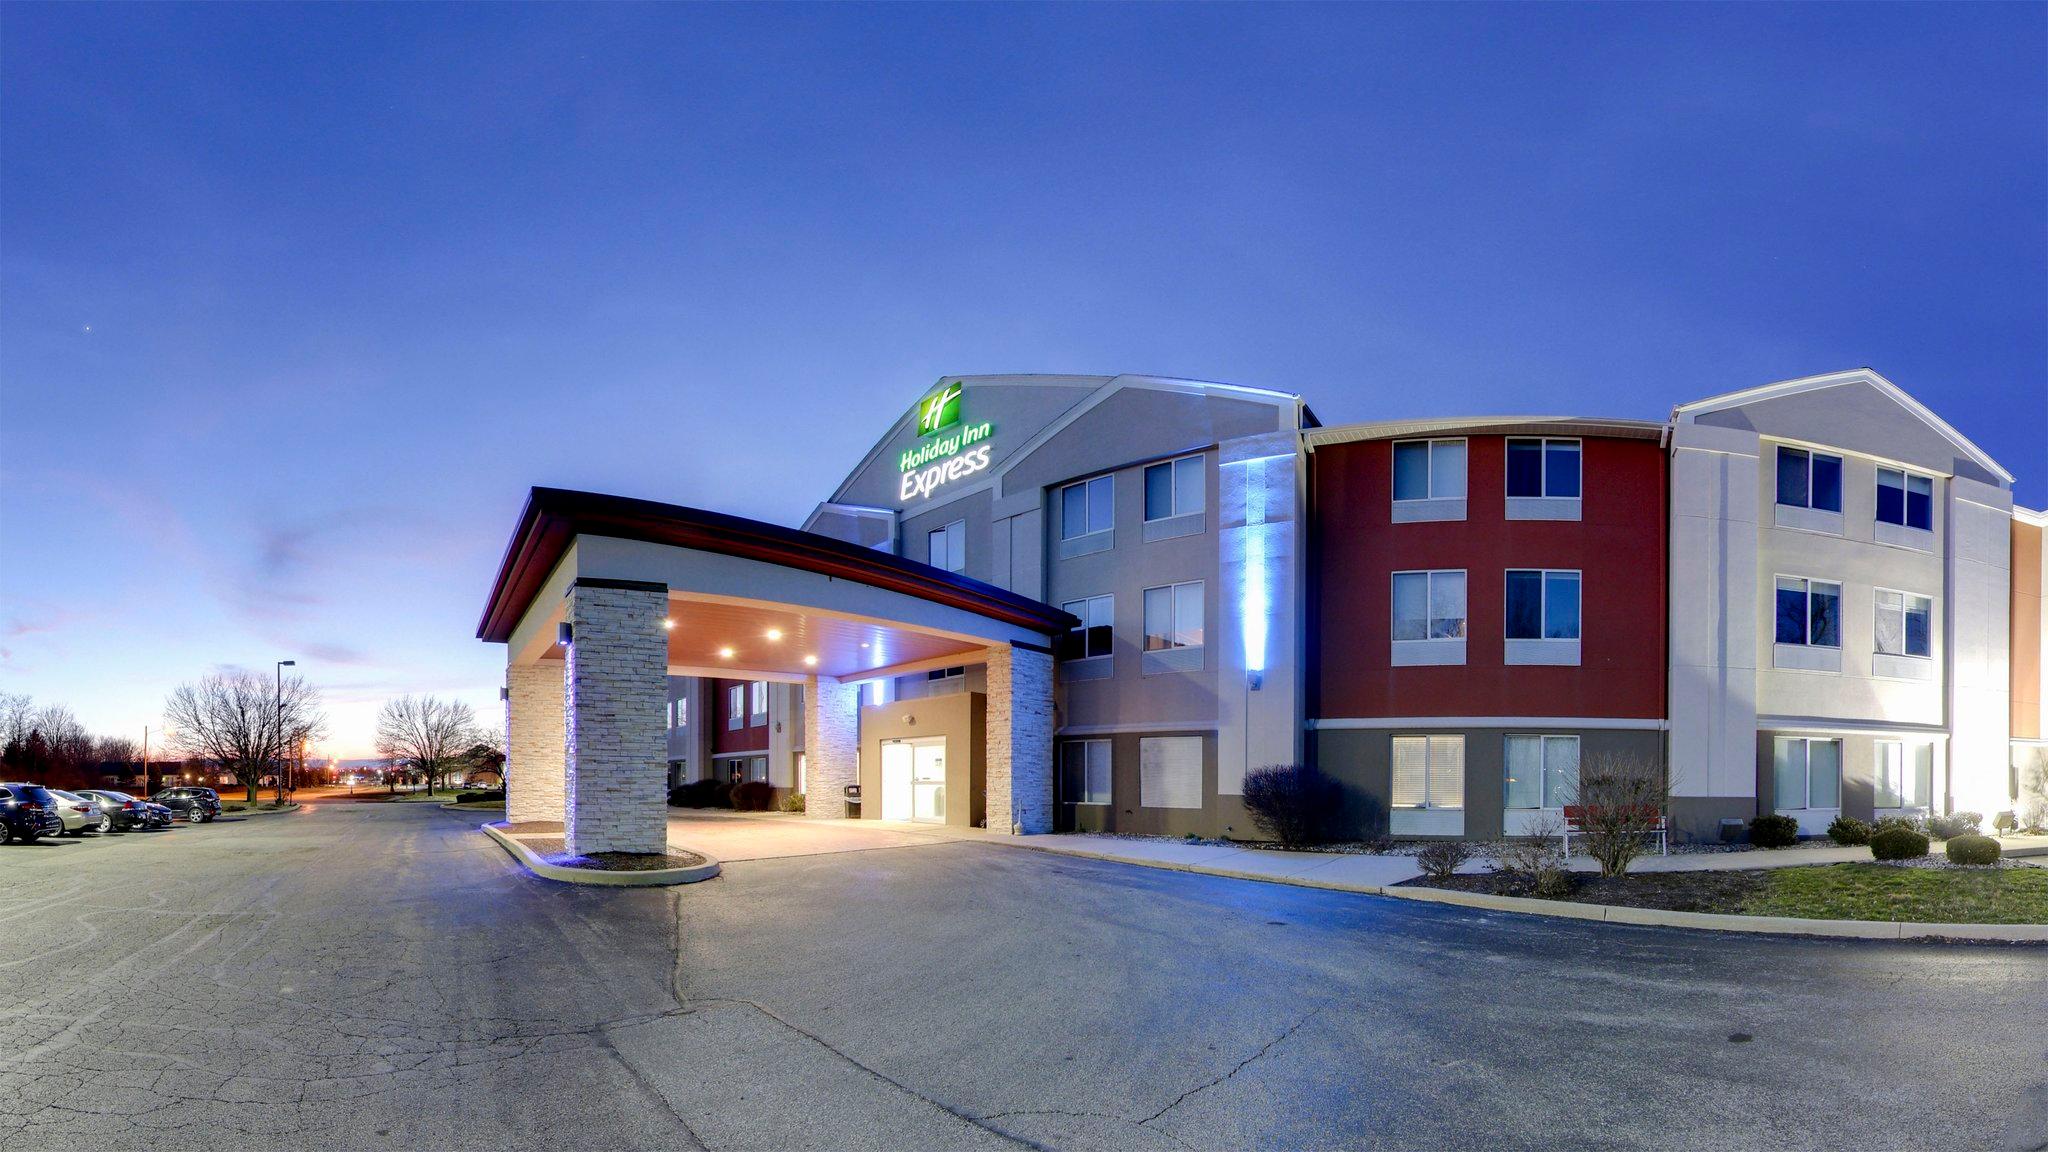 Holiday Inn Express Fort Wayne-East (New Haven) in New Haven, IN